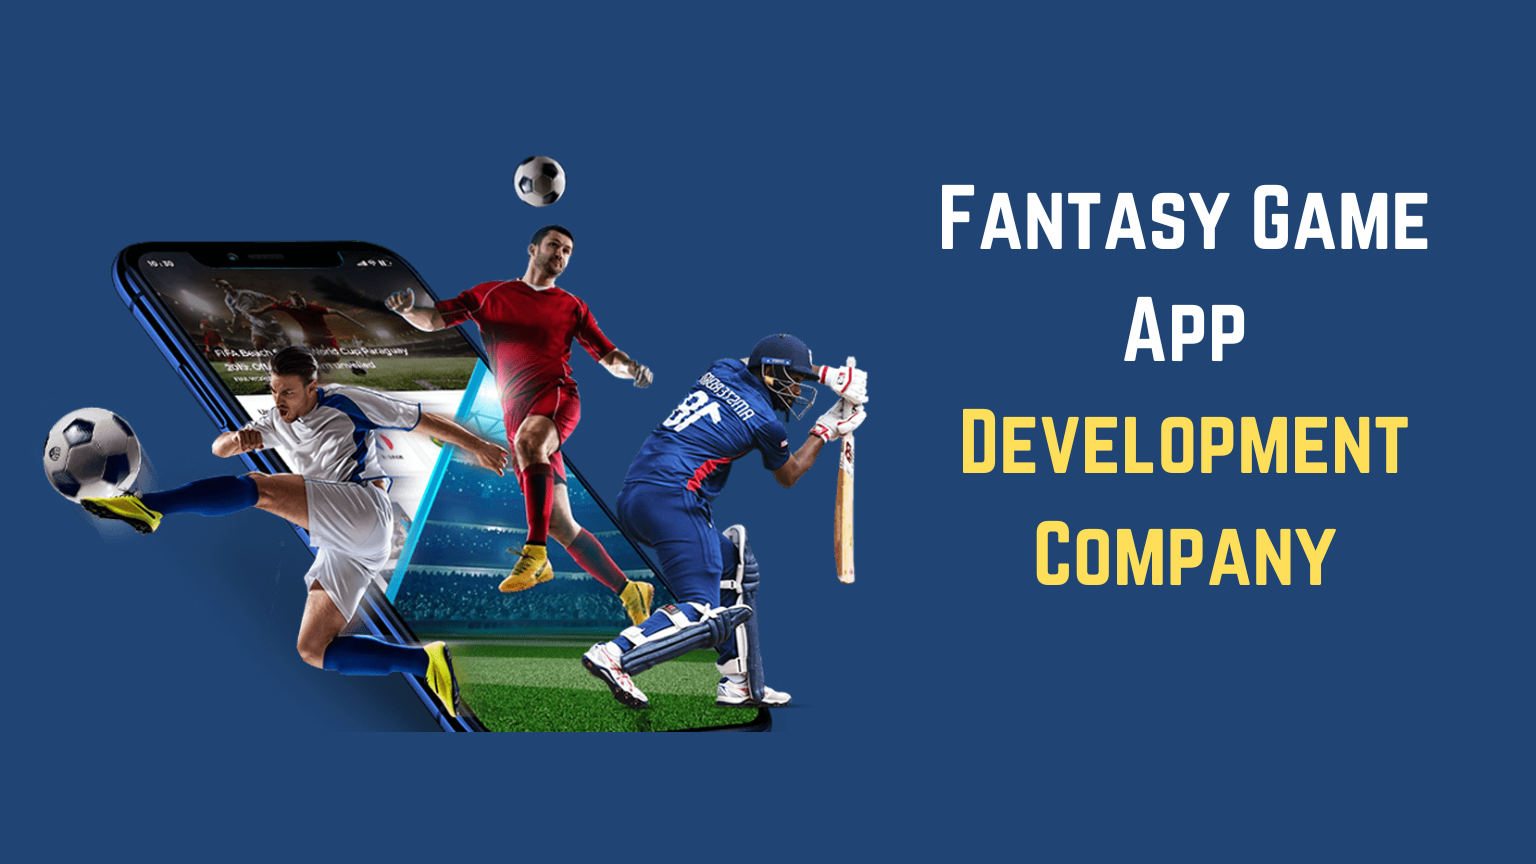 10 Reasons To Invest In Fantasy Game App Development Company